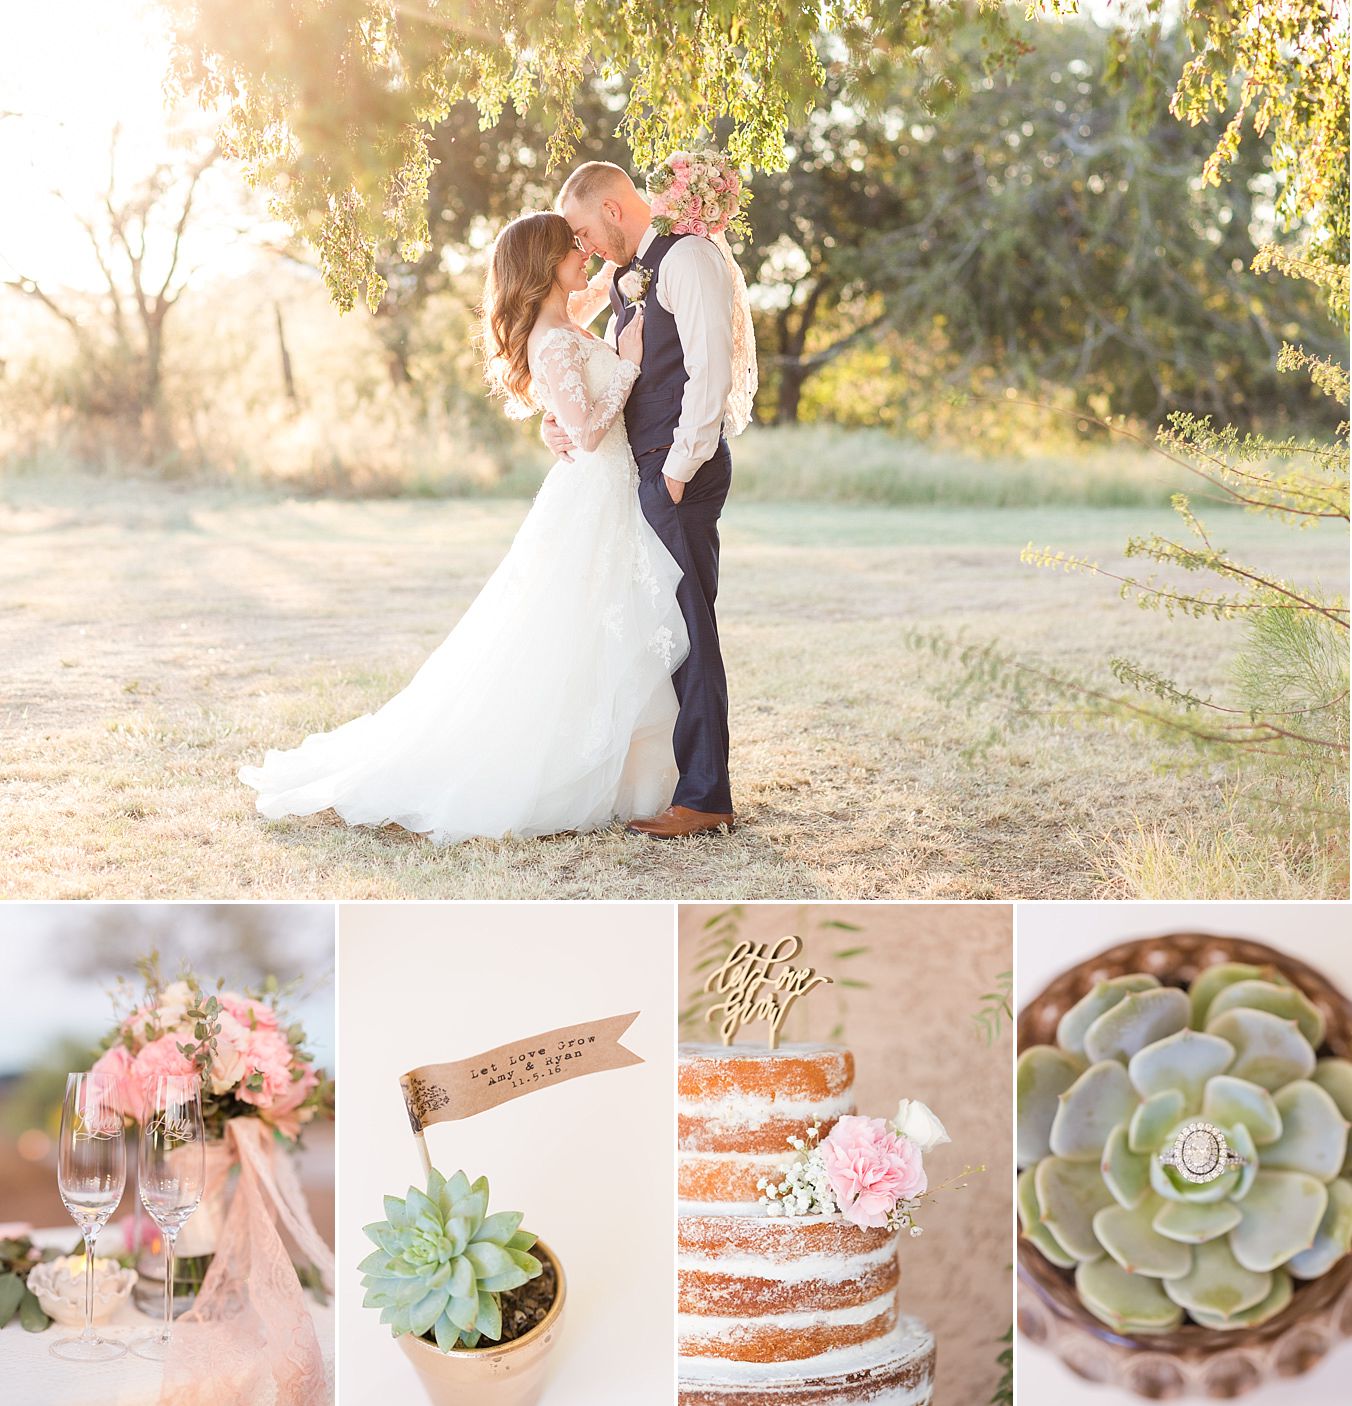 bride and groom, dusty rose wedding colors, succulents, naked wedding cake